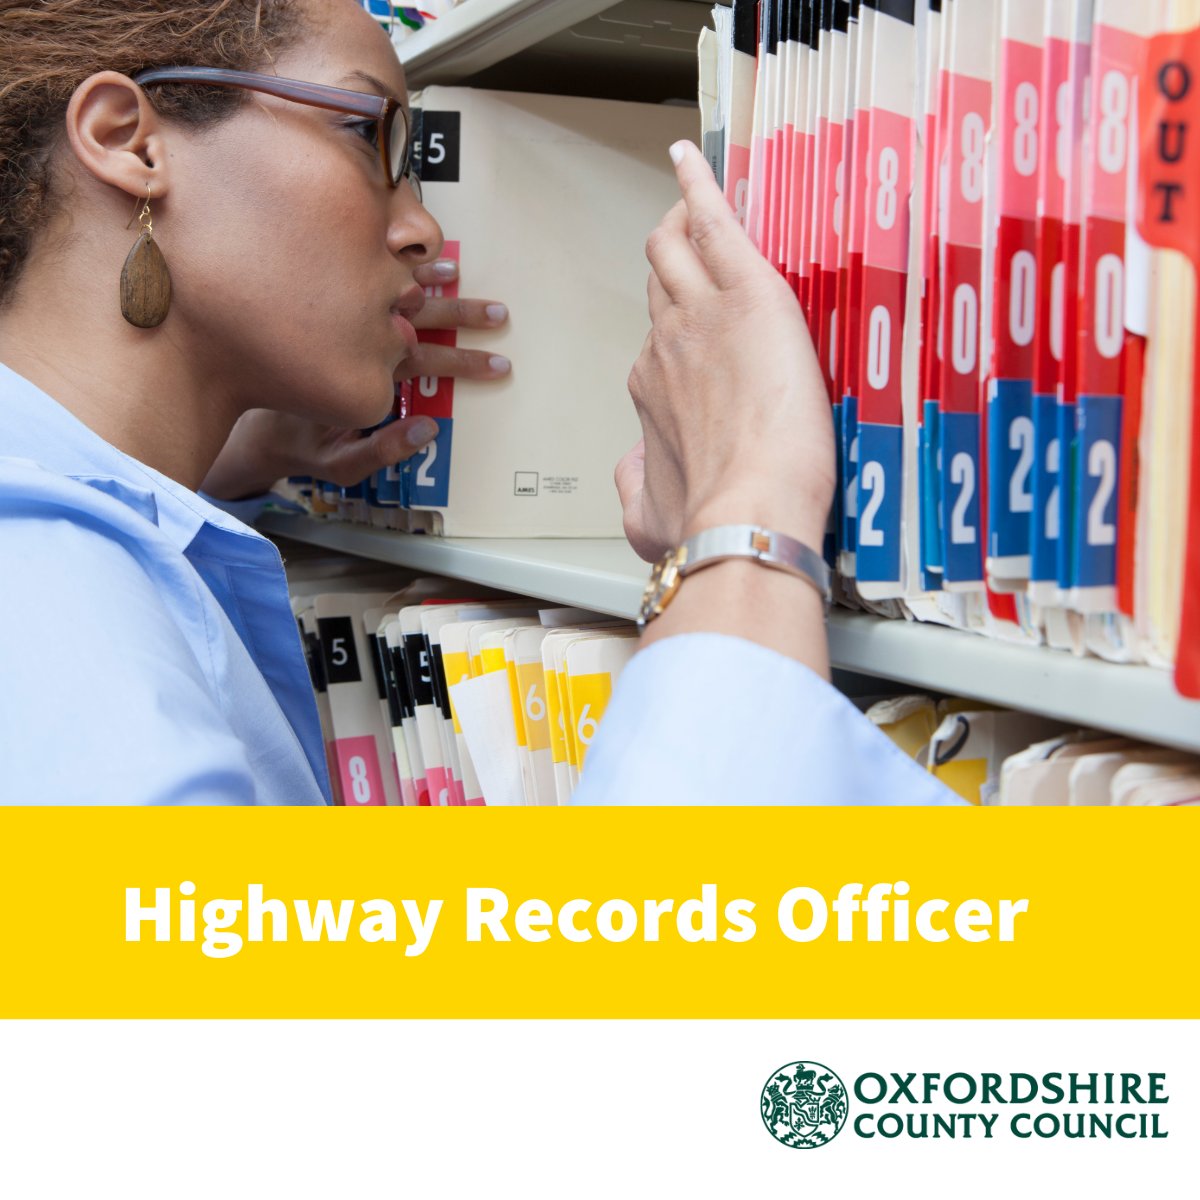 Come and help us research the highway in Oxfordshire. We’re looking for someone with a passion for the history of Oxfordshire to come and make a real difference to the way we maintain the records of our public highways. For more information and to apply: careers.newjob.org.uk/OCC/job/Oxford…